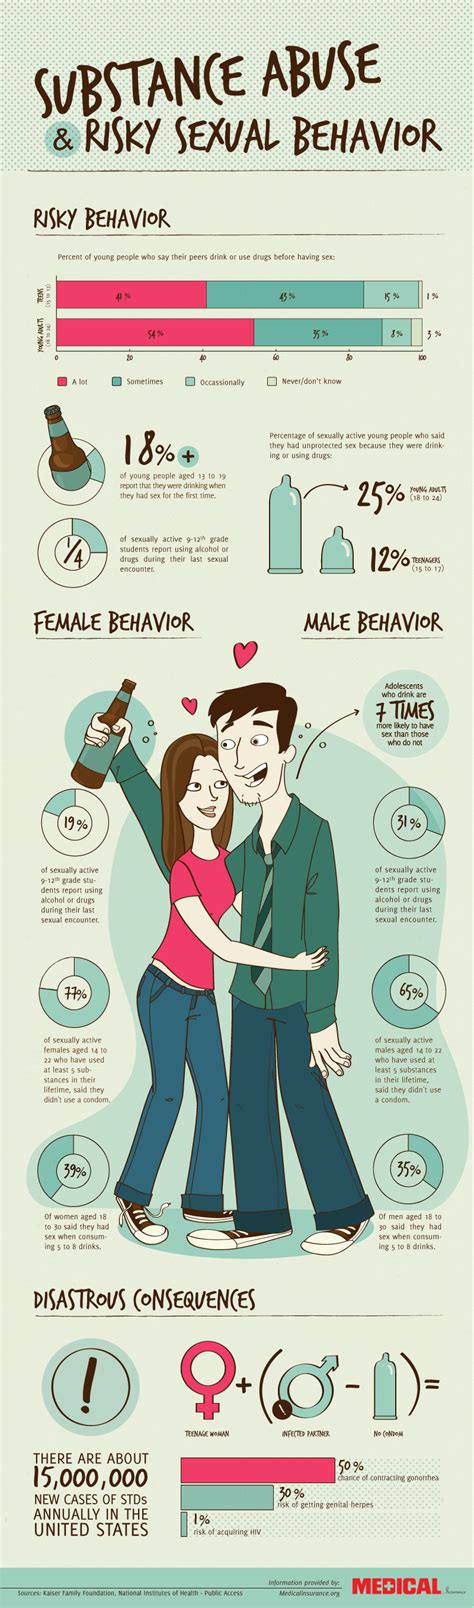 Substance Abuse And Risky Sexual Behavior Infographic Infographic List